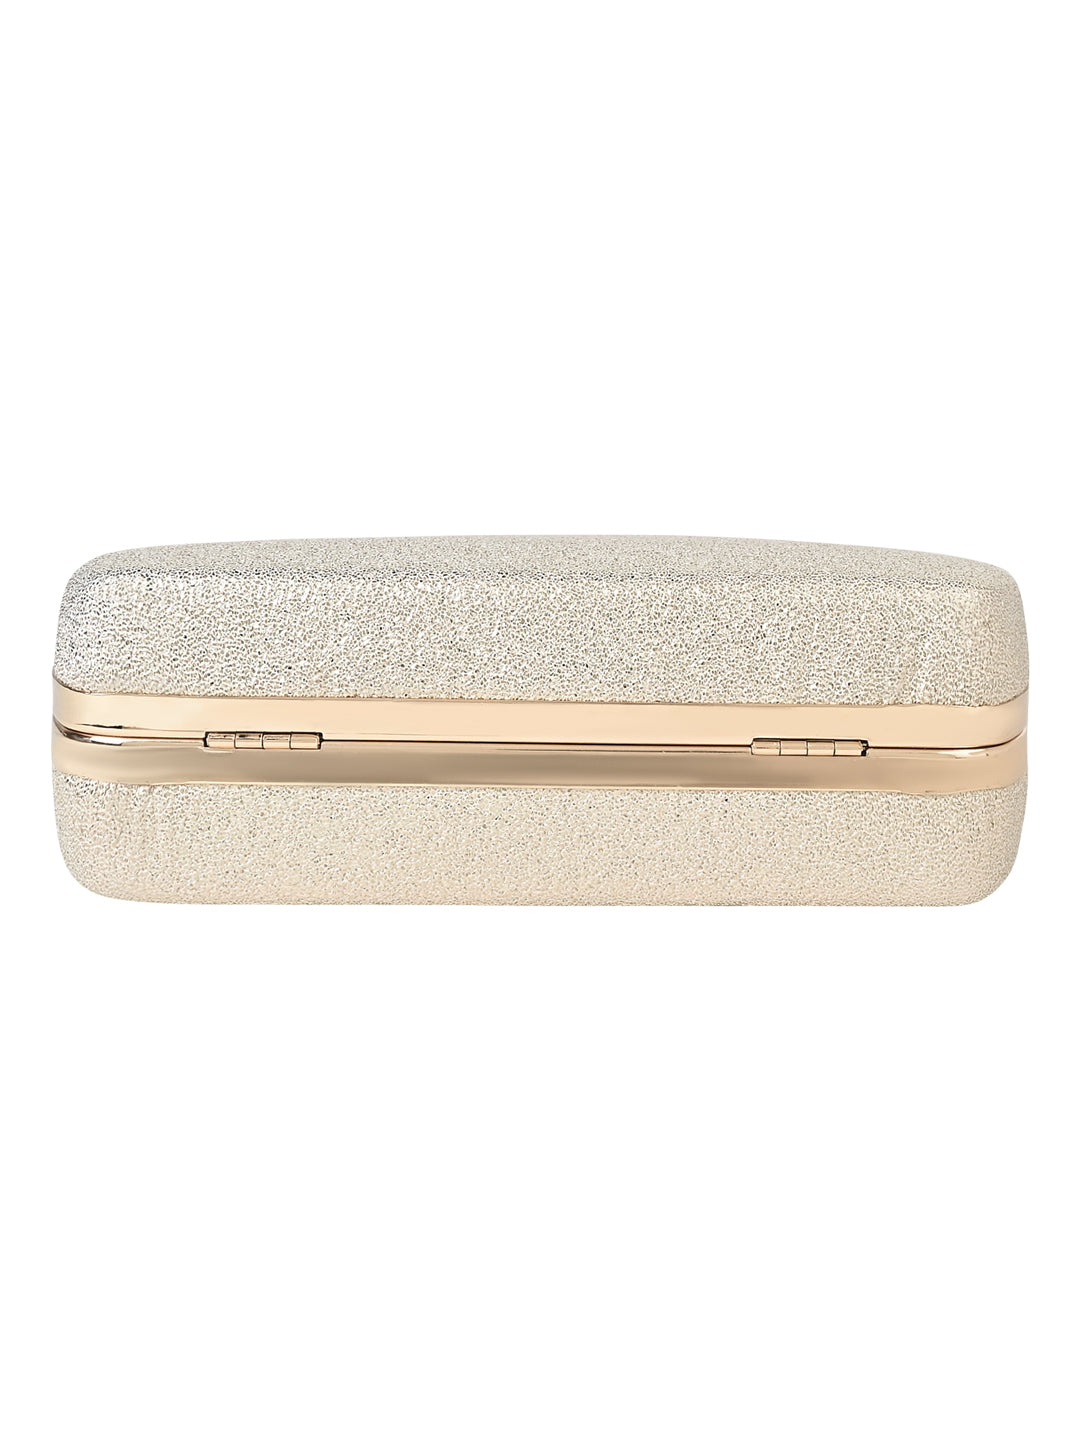 A Vdesi plain gold clutch with a shiny surface on a white background.